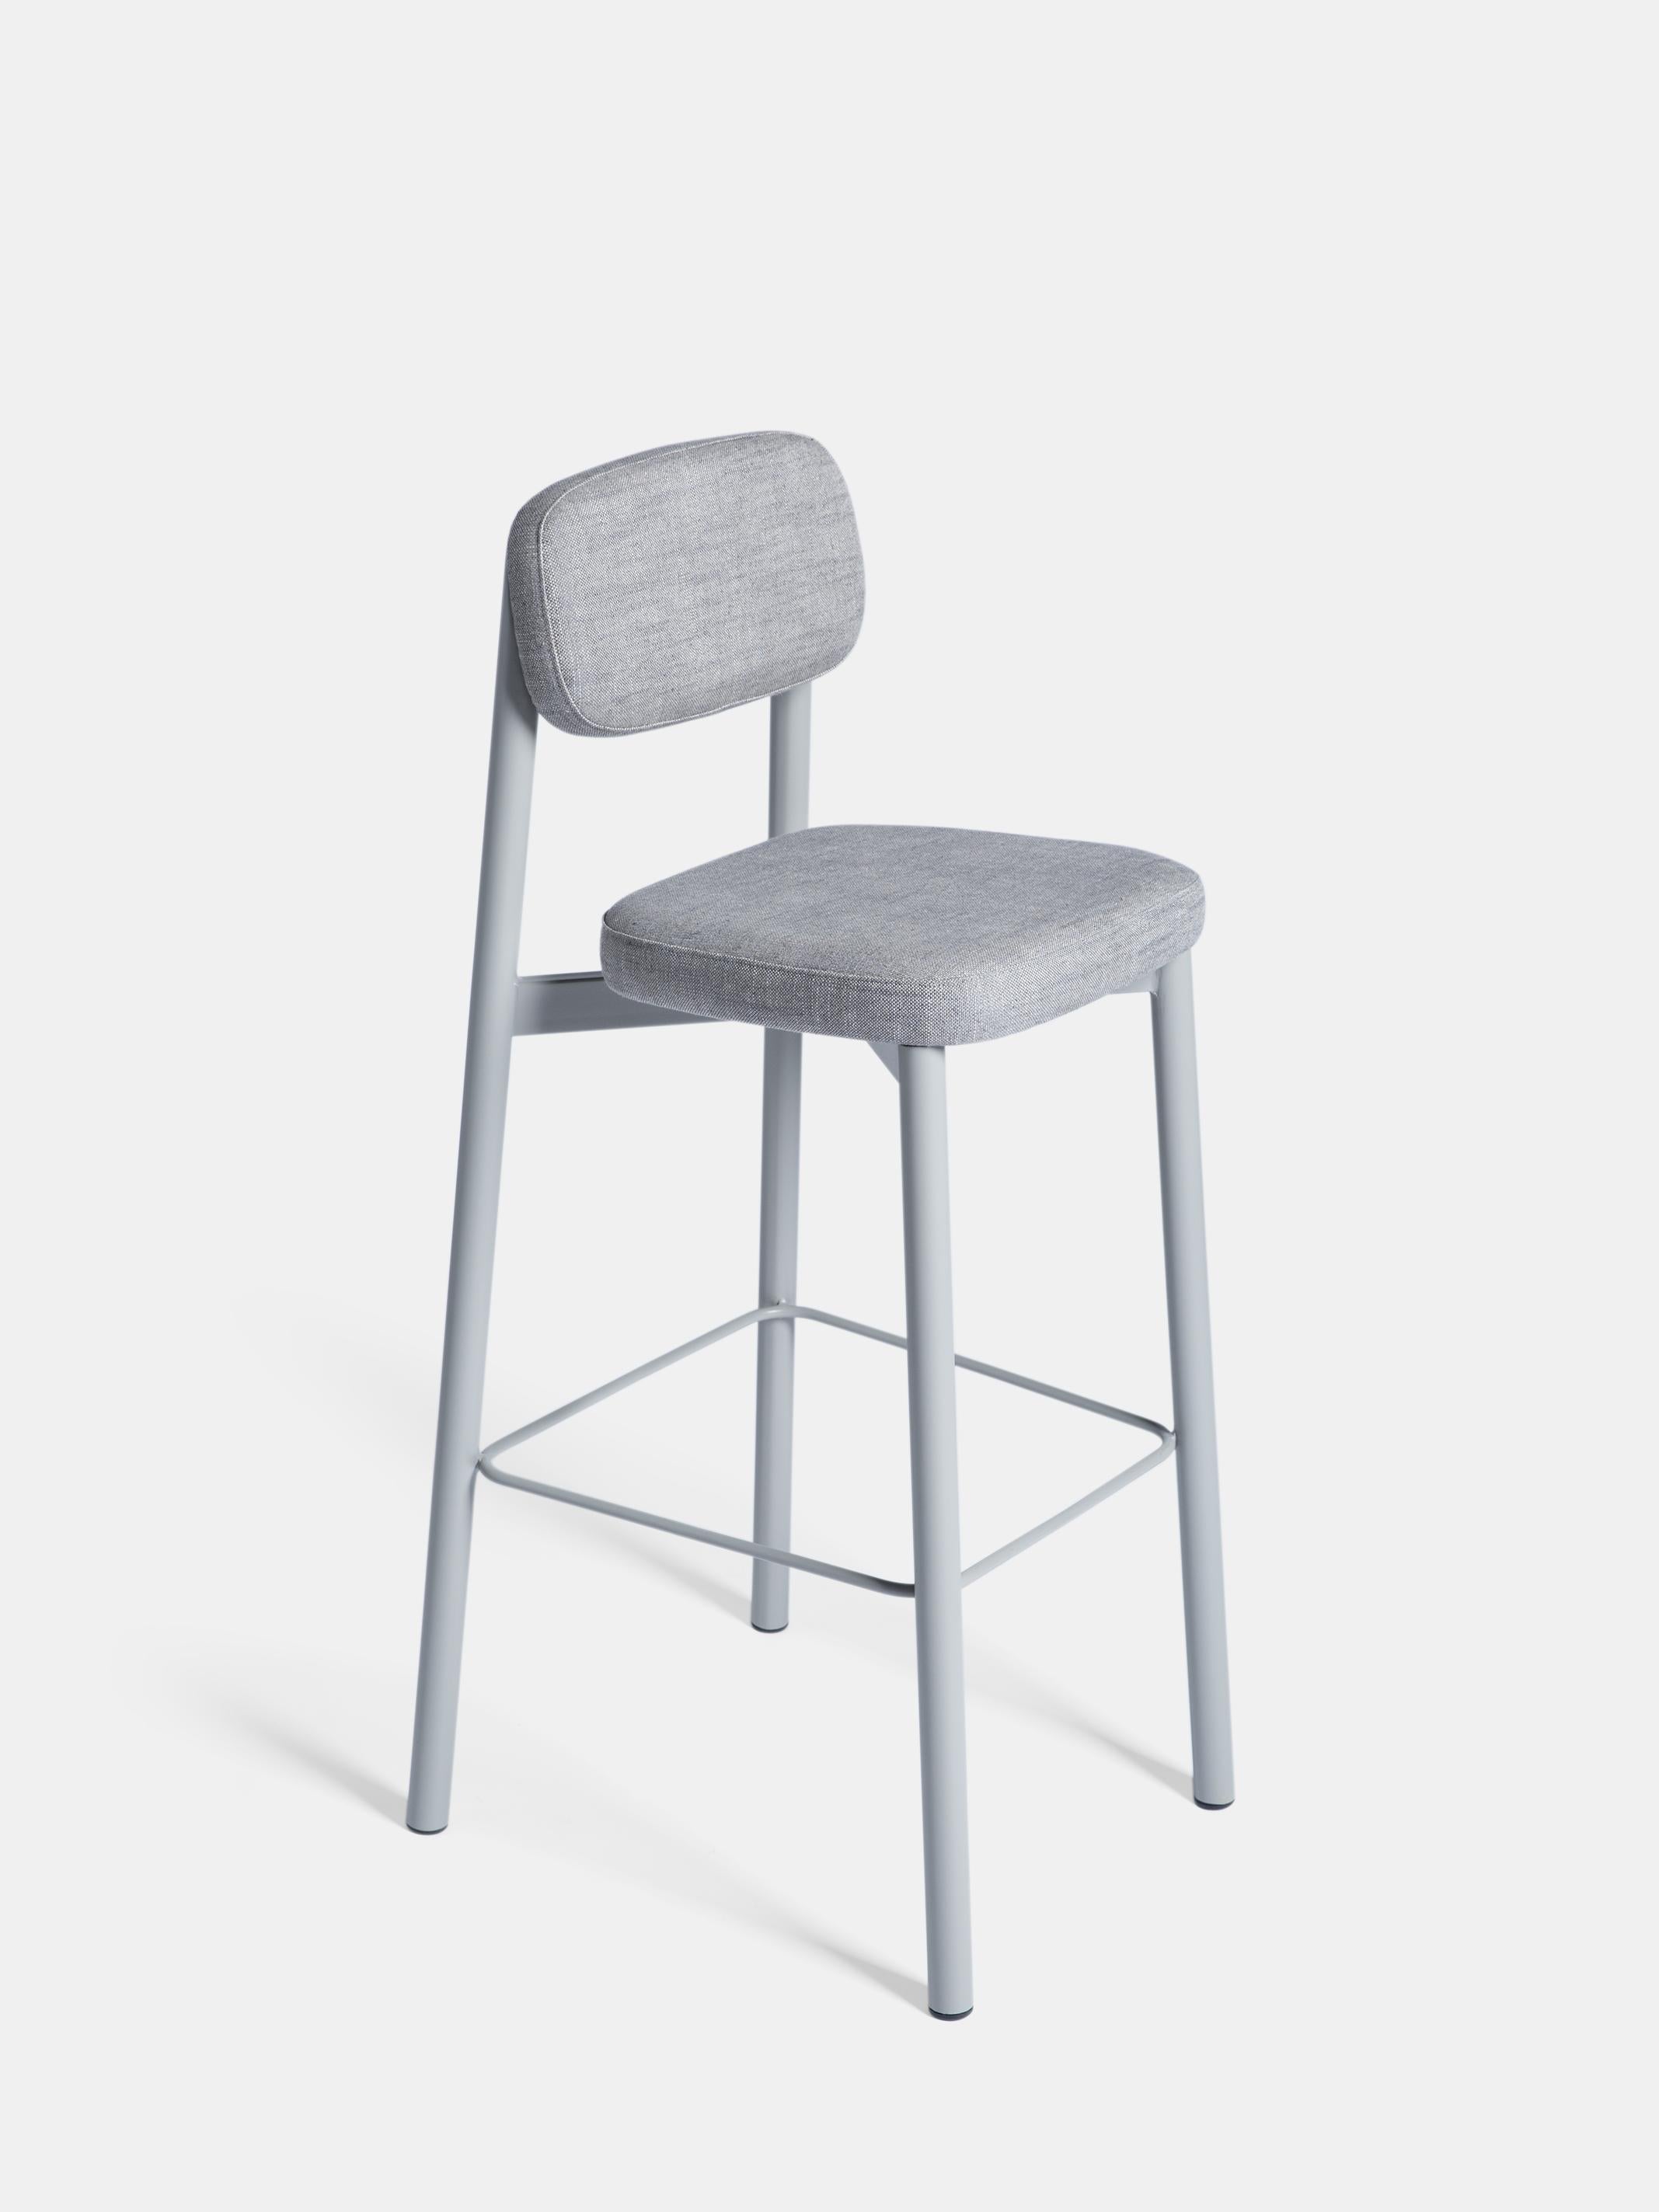 Set of 6 Grey Residence 75 Counter Chairs by Kann Design
Dimensions: D 50 x W 46 x H 103 cm.
Materials: Steel tube, HR foam, fabric upholstery Sahco Ellis 4 (70% viscose, 30 % linen).
Available in other colors.

All of the Residence seats were